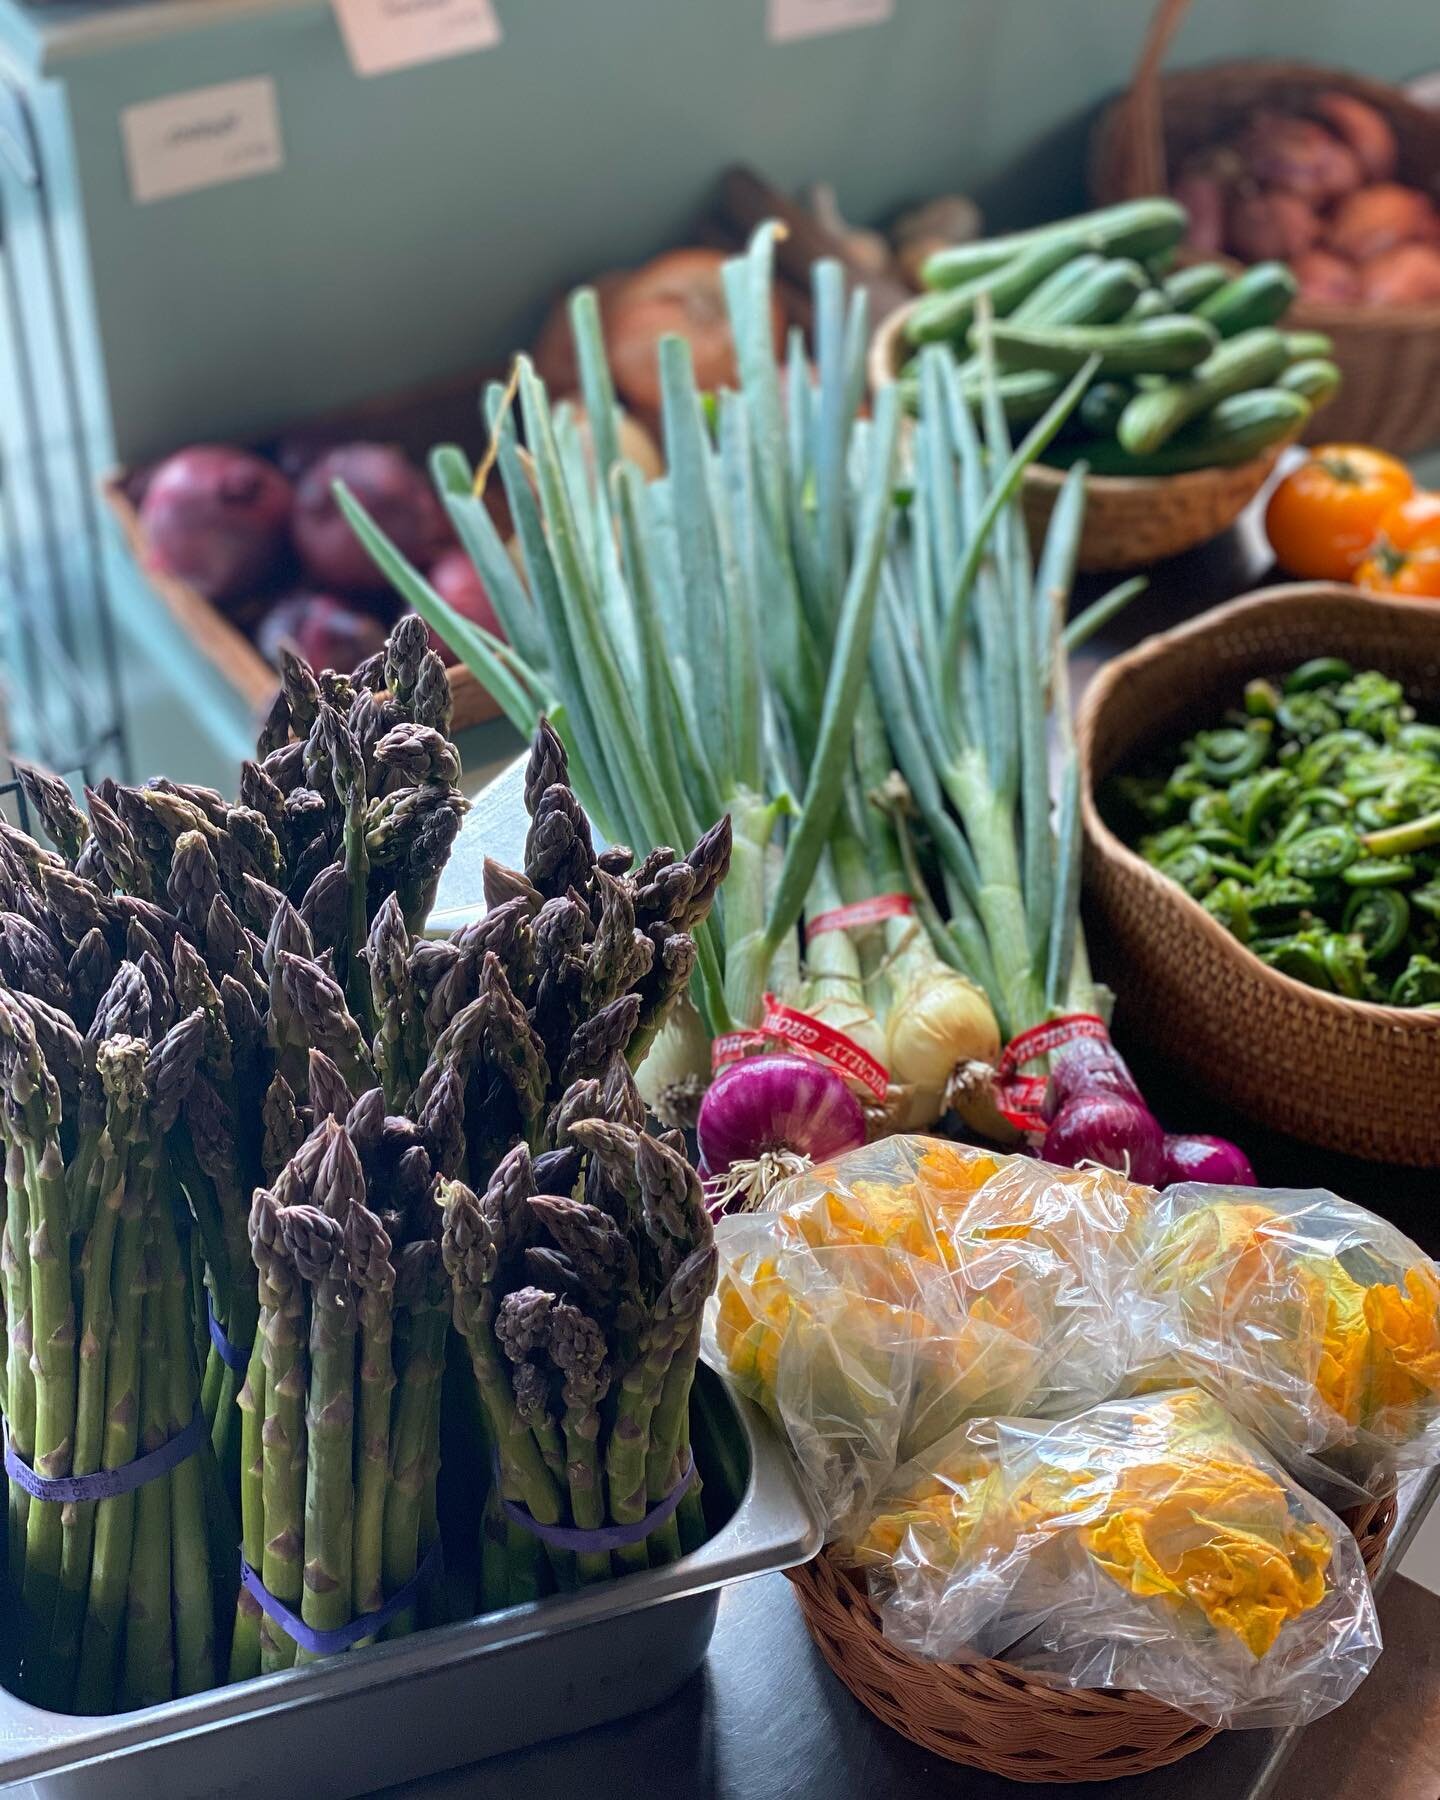 LOCAL PRODUCE - we&rsquo;re blessed to receive regular deliveries of local produce year round (or mostly year round!) from @goransonfarm @dandelionspringfarm @winslowfarm and @snellfarmkitchen &mdash; and Saturdays in season we supplement those deliv